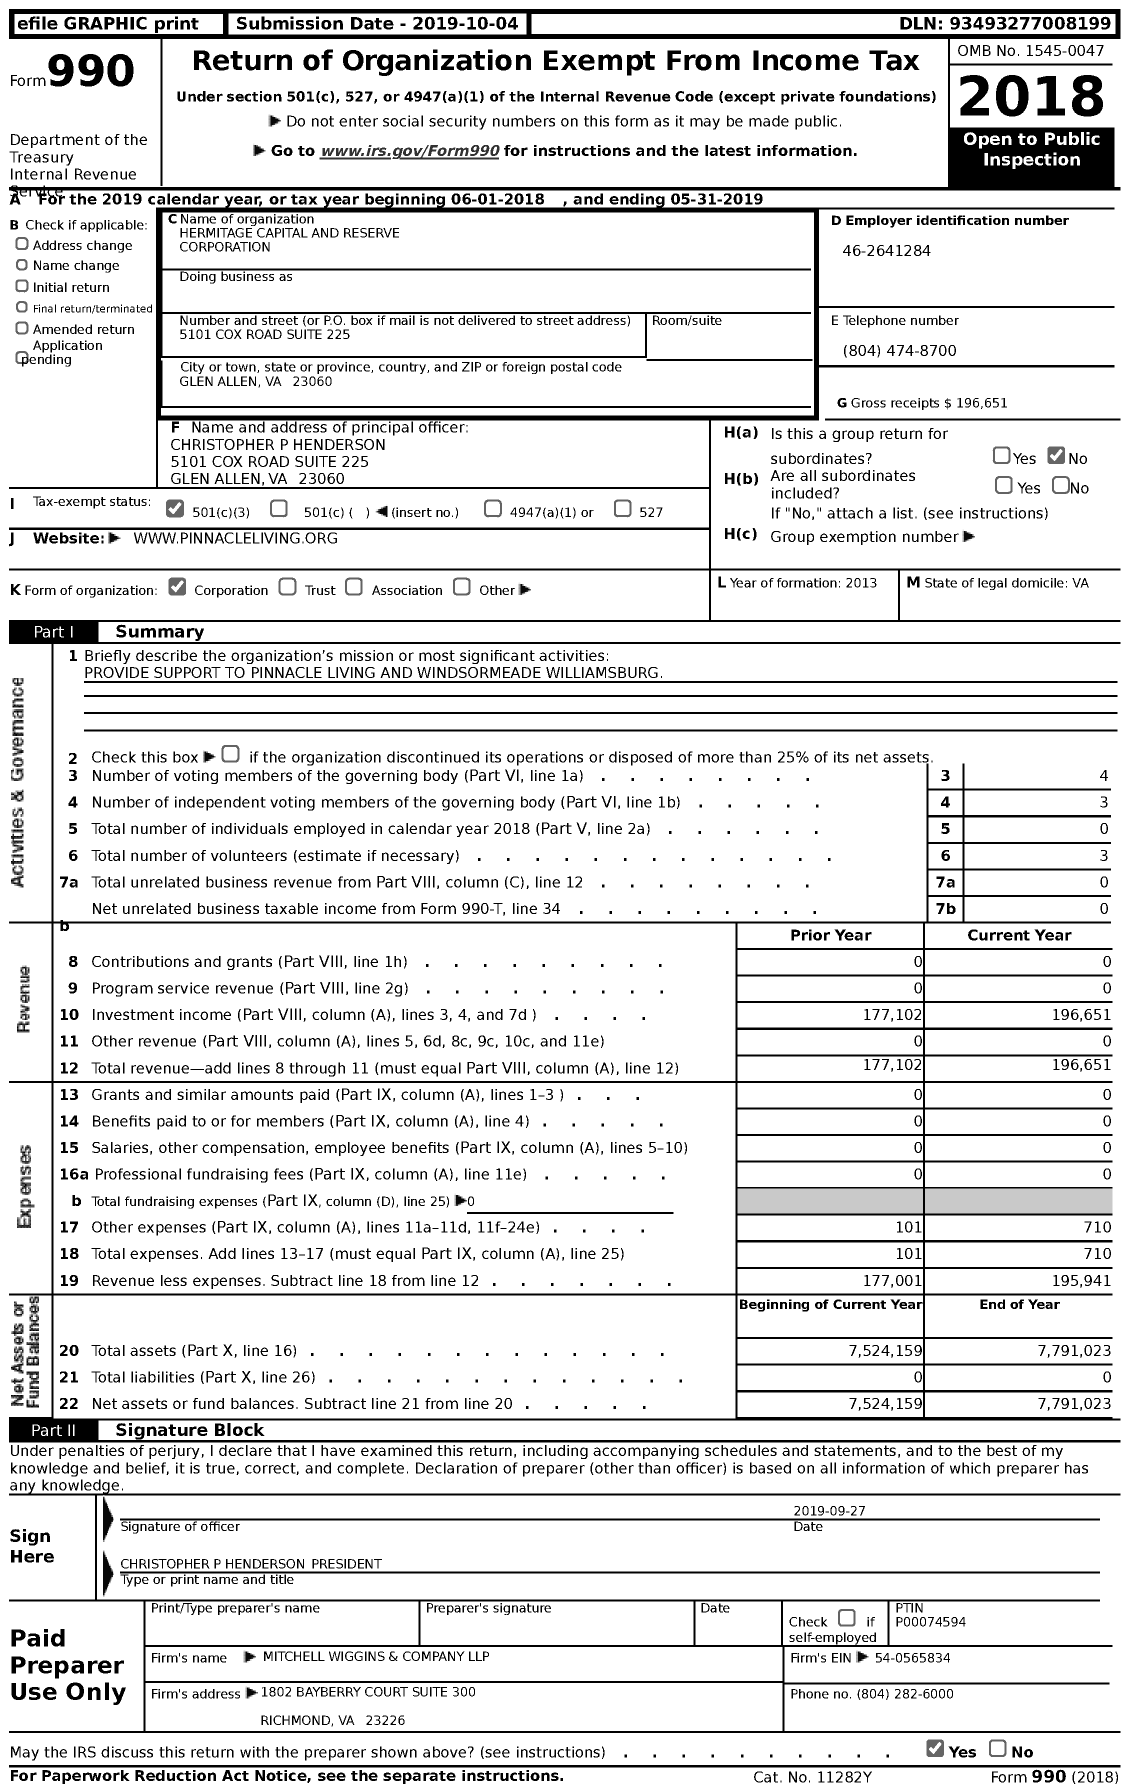 Image of first page of 2018 Form 990 for Hermitage Capital and Reserve Corporation